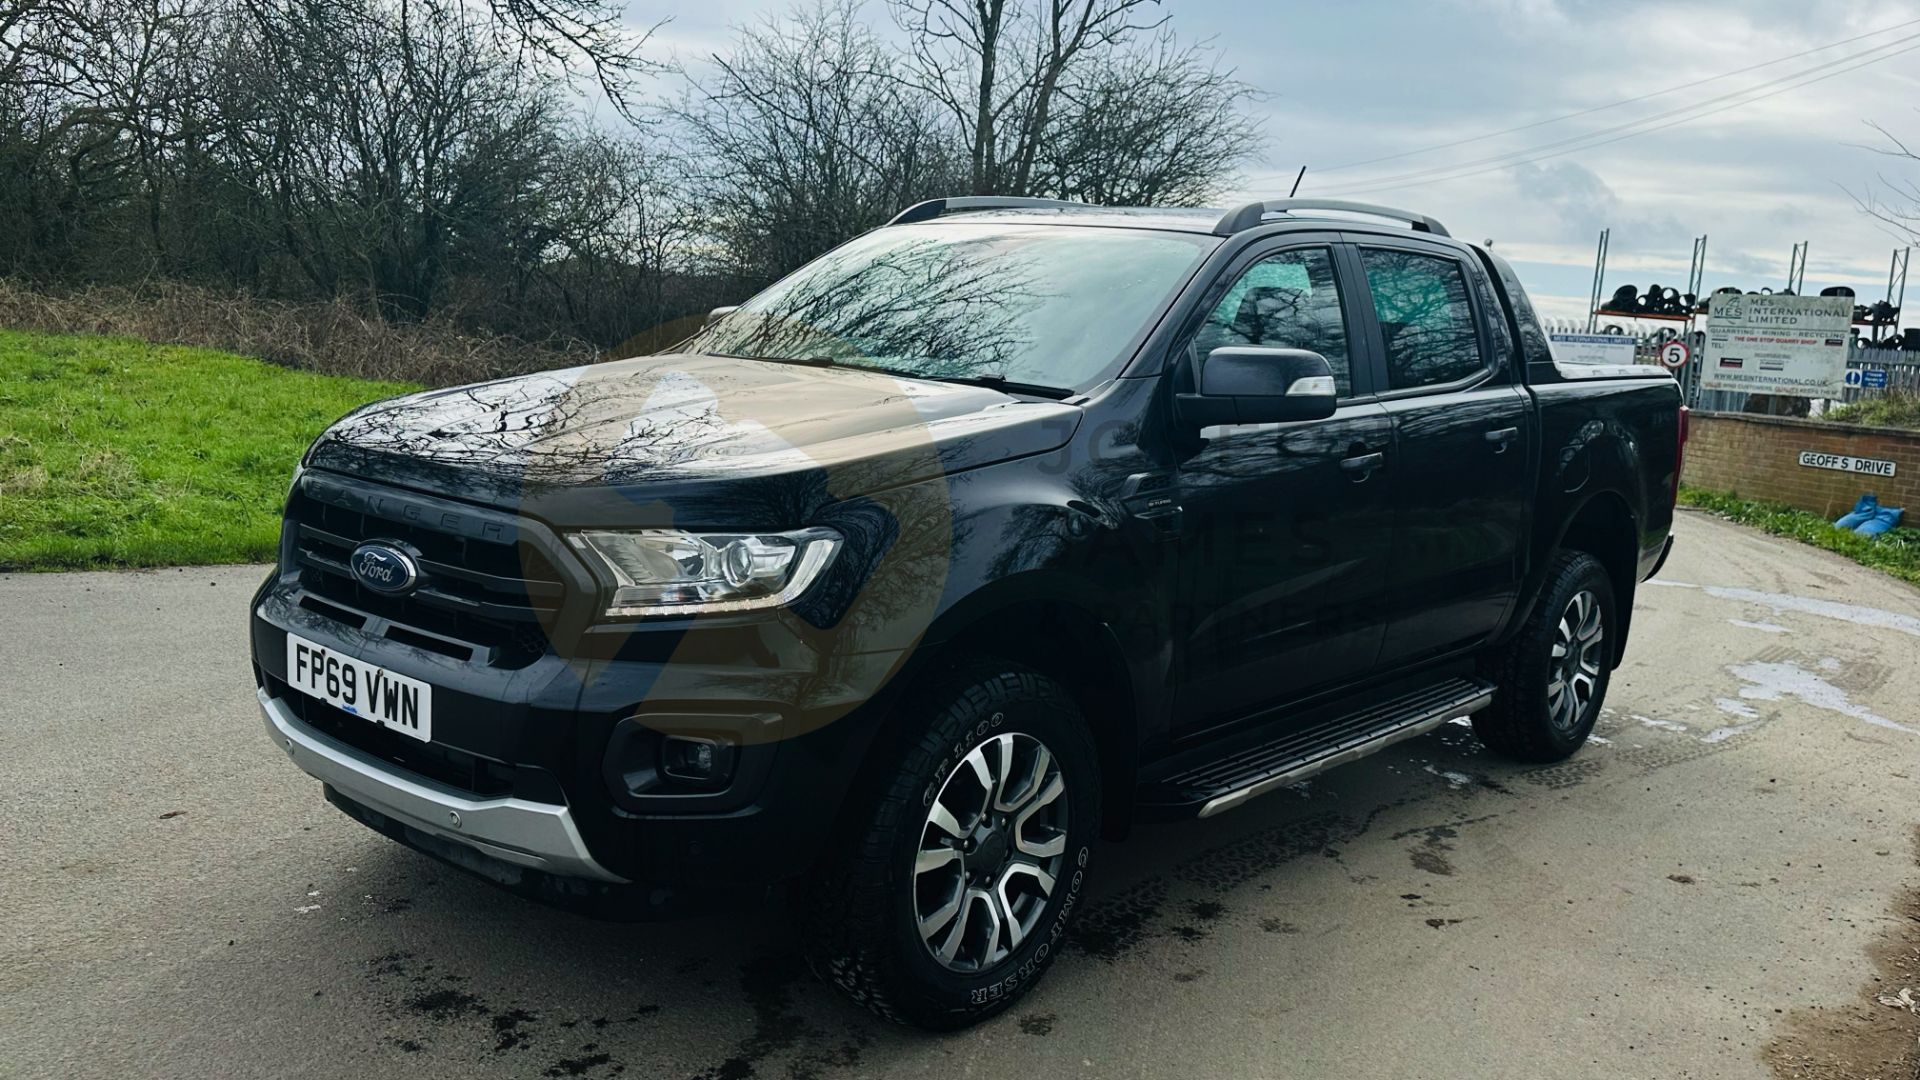 FORD RANGER *WILDTRAK* DOUBLE CAB PICK-UP (2020 - FACELIFT MODEL) 2.0 TDCI 'ECOBLUE' - 10 SPEED AUTO - Image 5 of 45